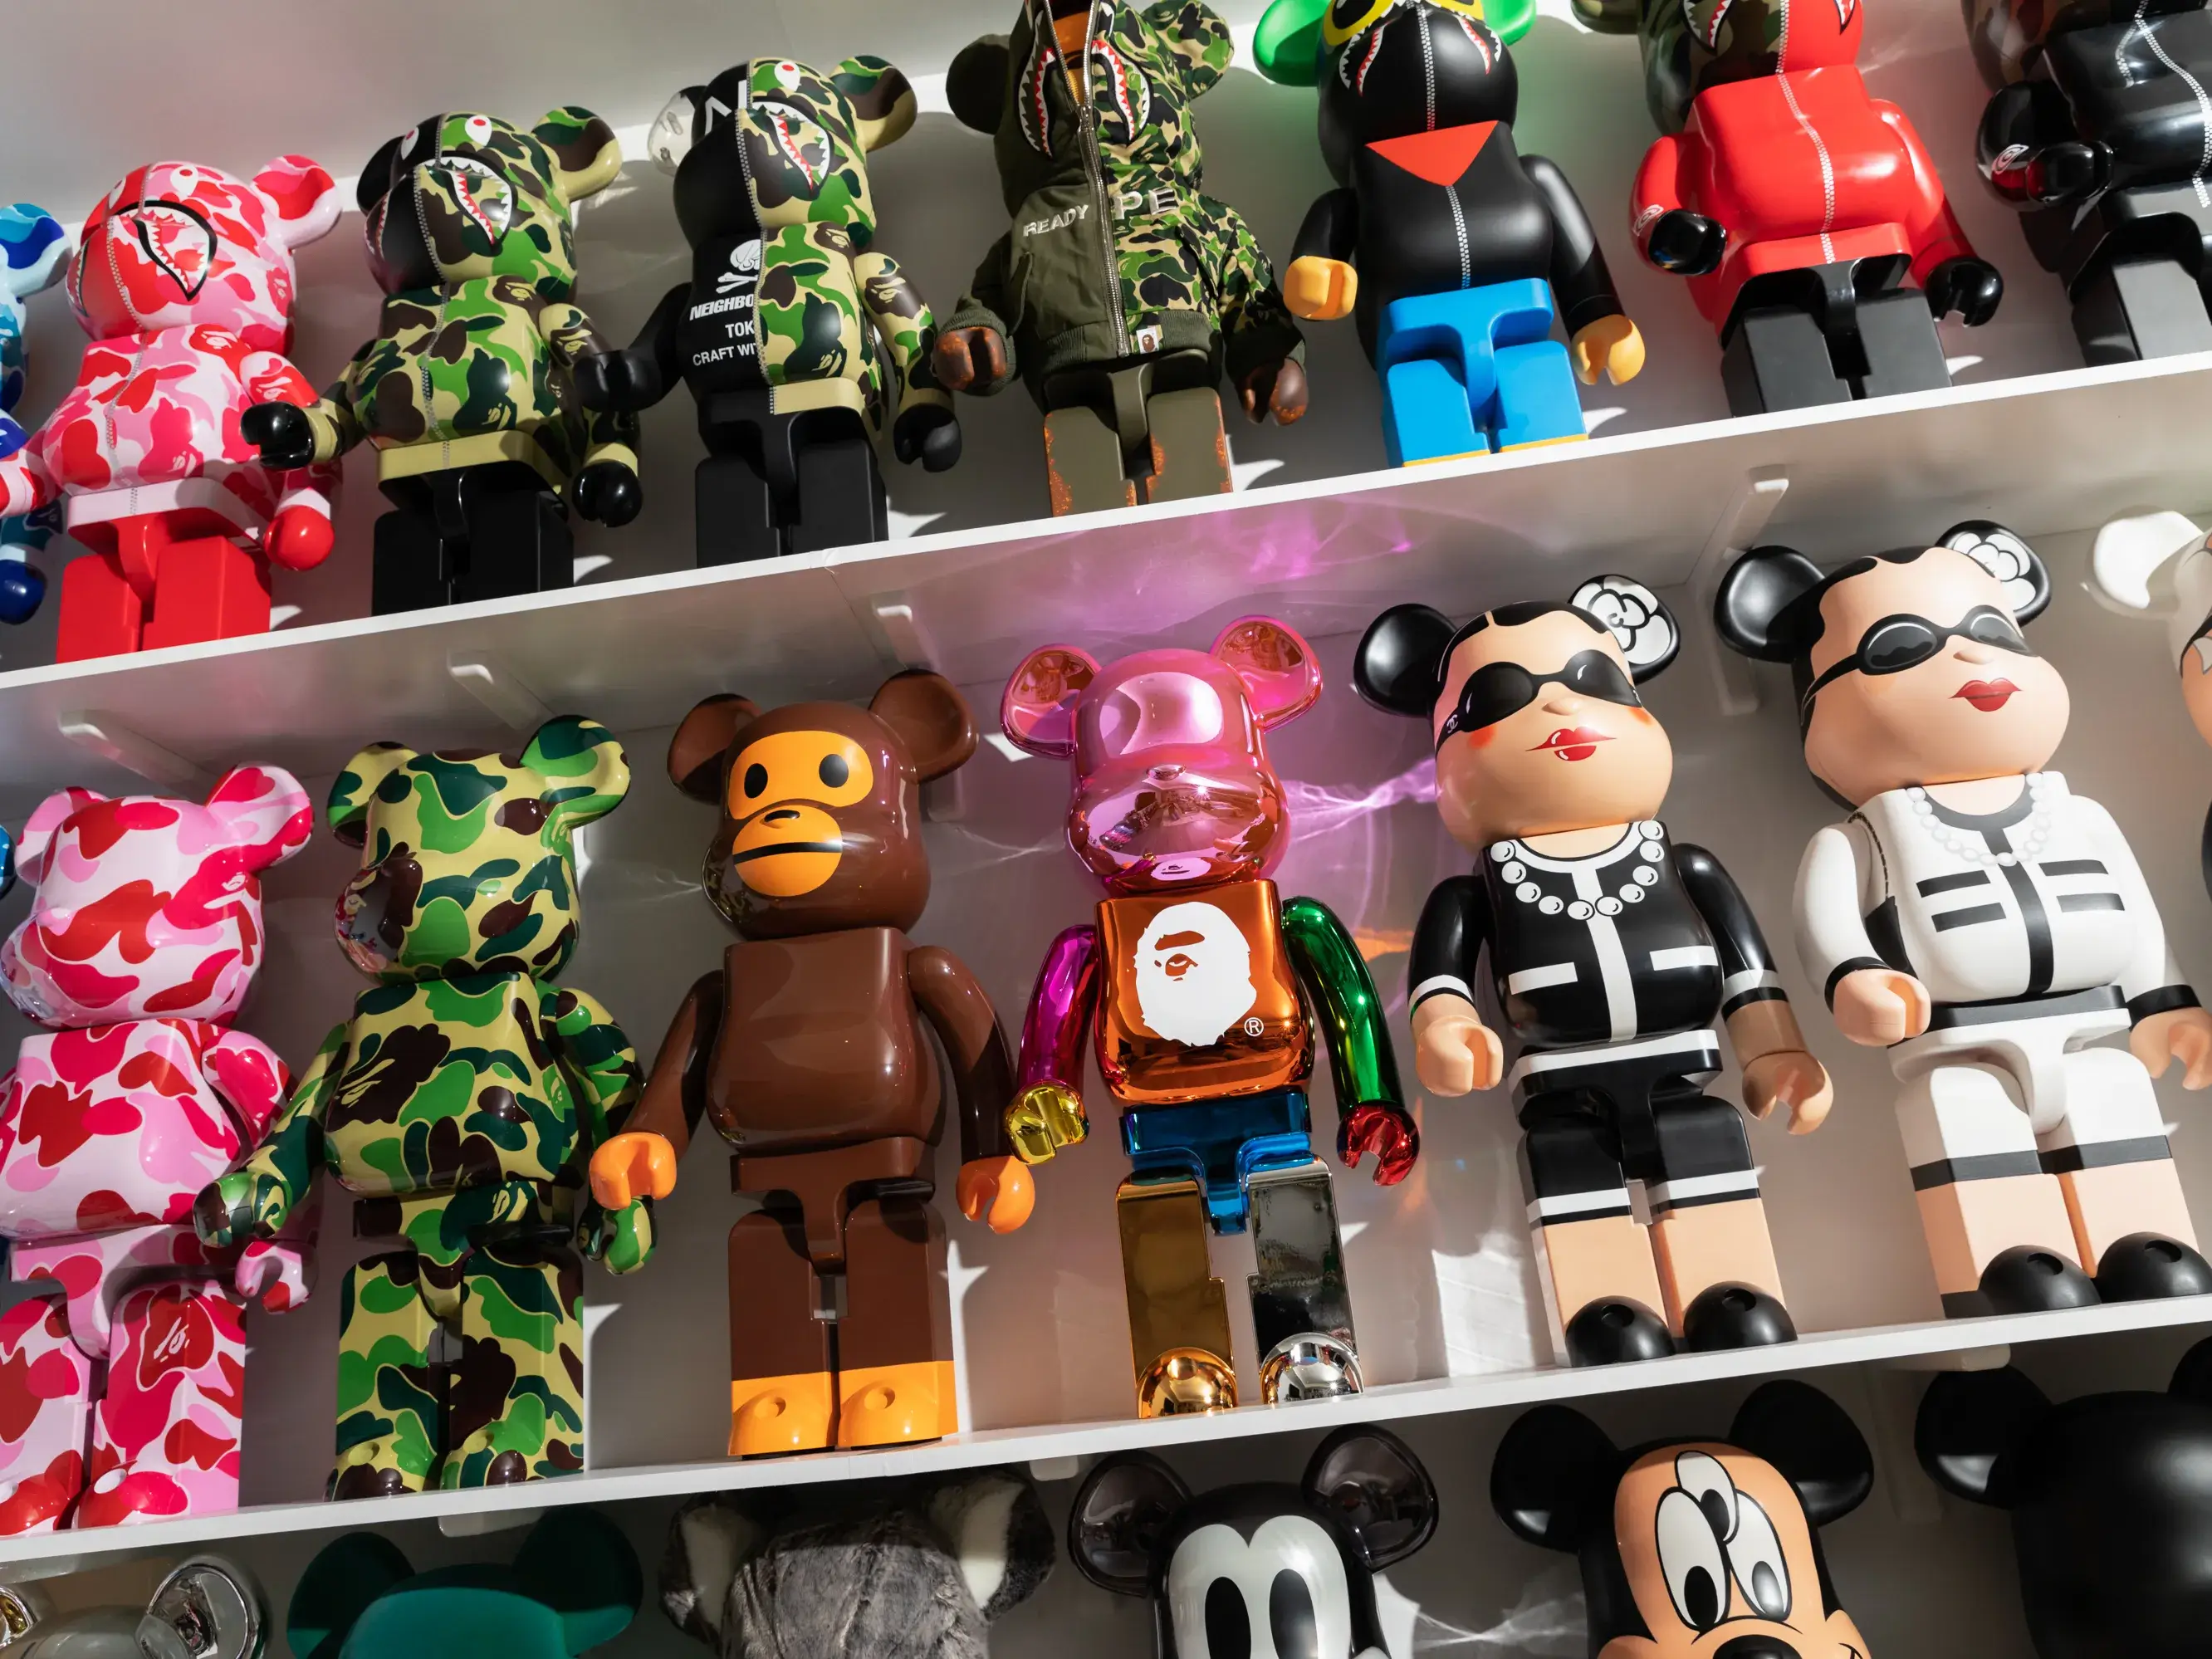 The Art of Collaboration - Bearbrick Meets Pop Culture